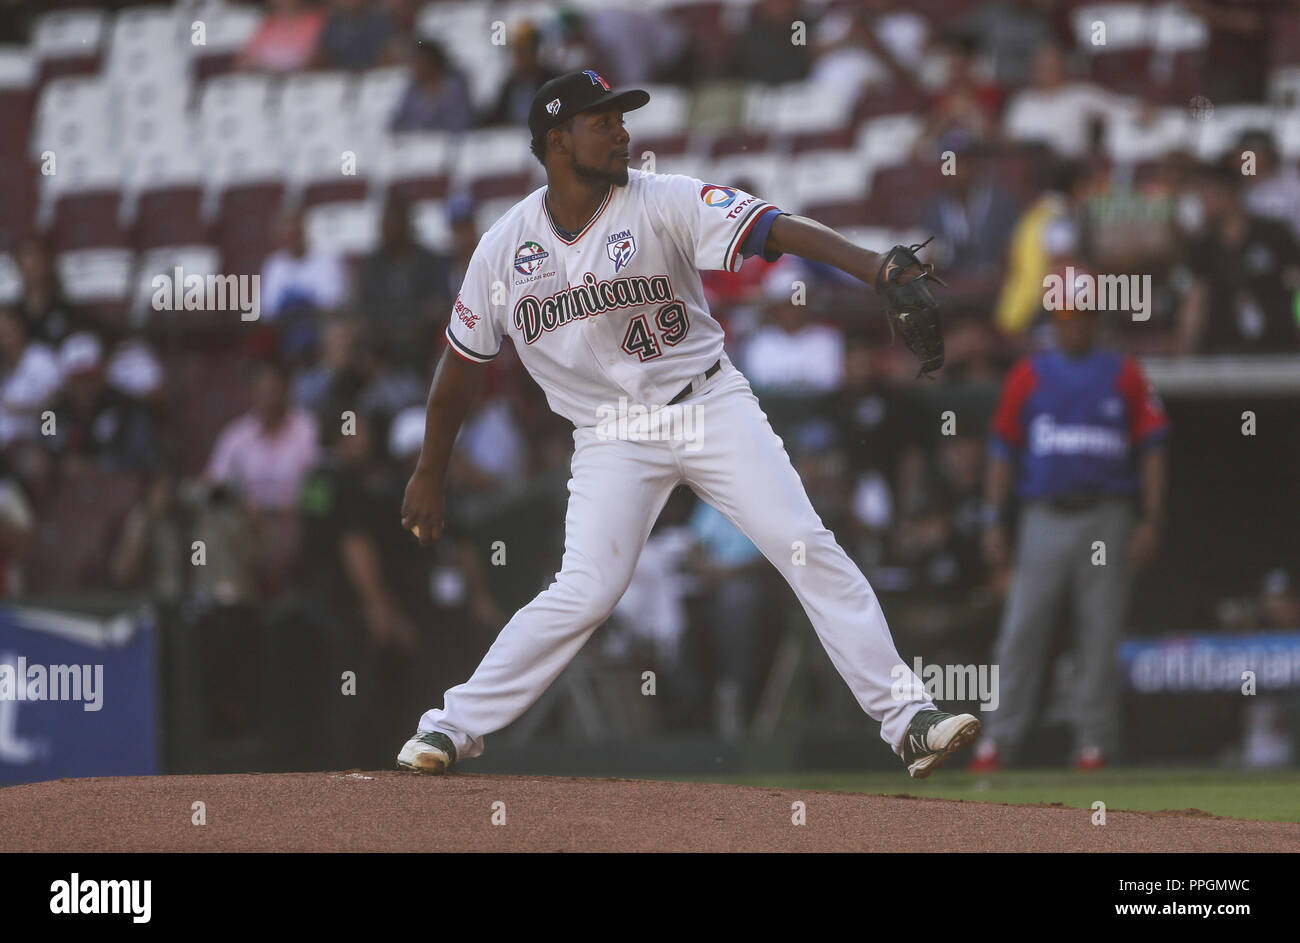 Initial pitcher of Tigres del Licey of Dominican Republic, Lázaro Blanco makes a pitch in the first inning, During the baseball game for the Caribb Stock Photo